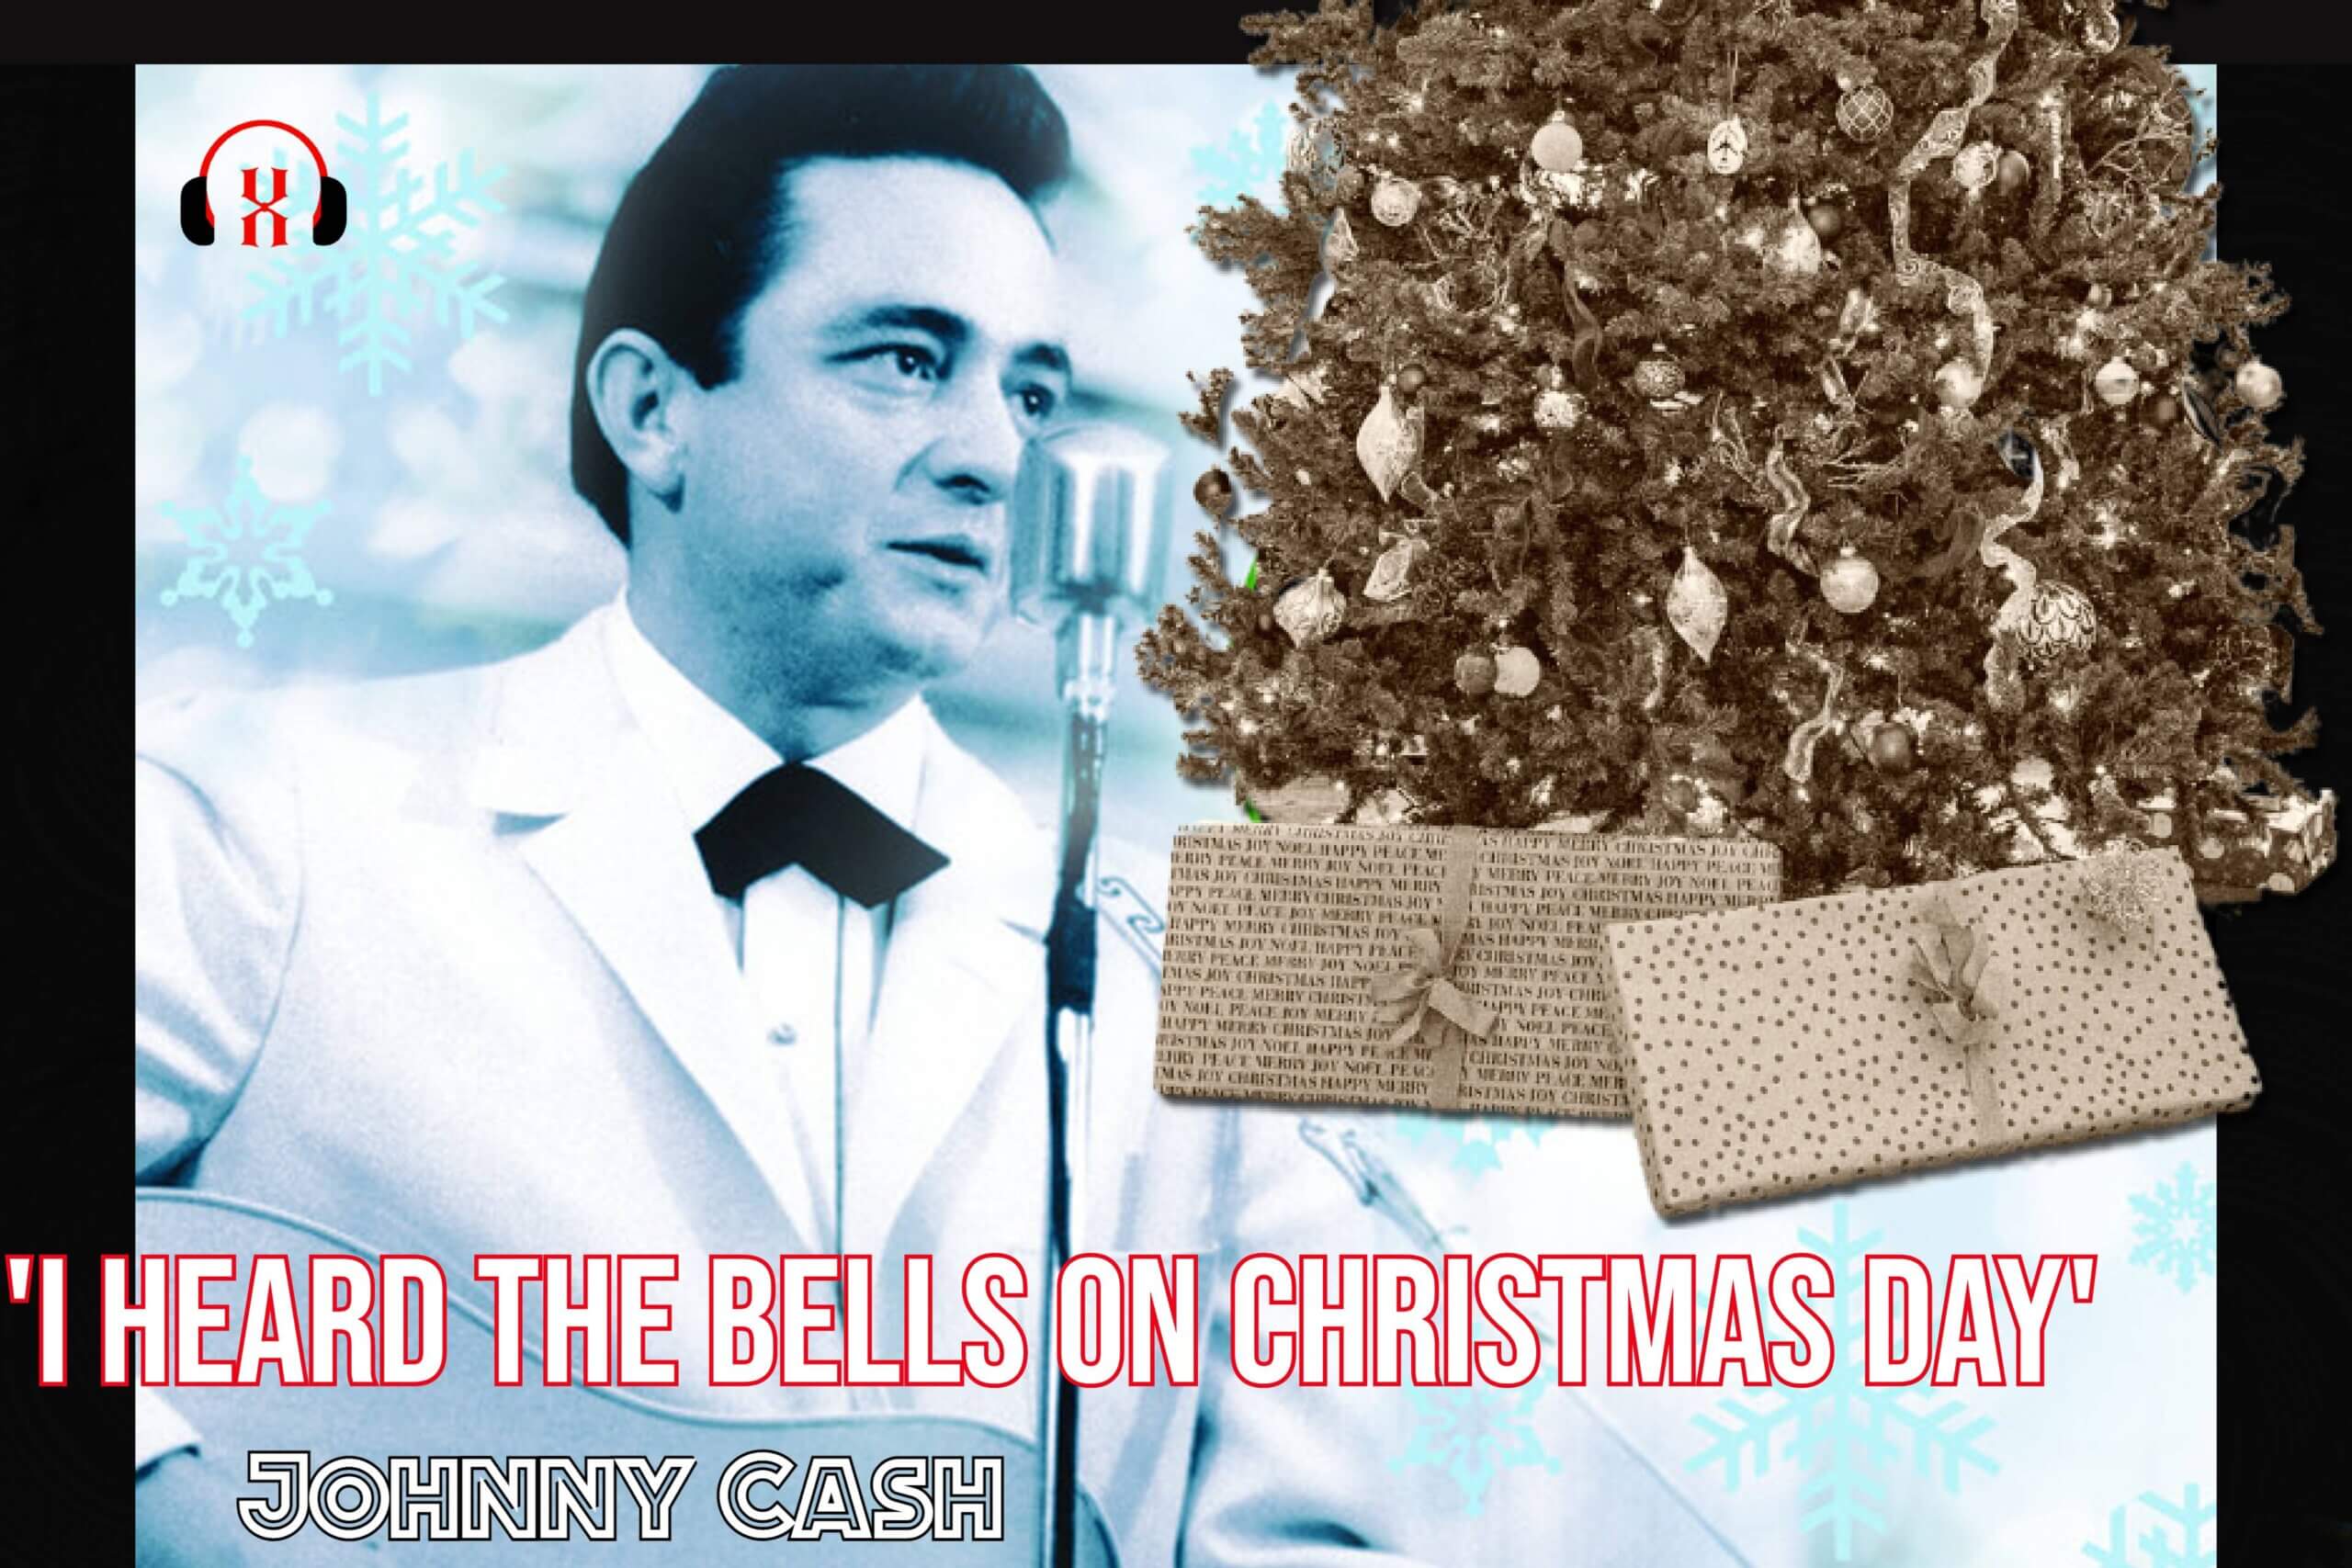 "Johnny Cash's Christmas Symphony: The Timeless Tale Behind 'I Heard the Bells on Christmas Day' That Strikes a Chord of Hope"